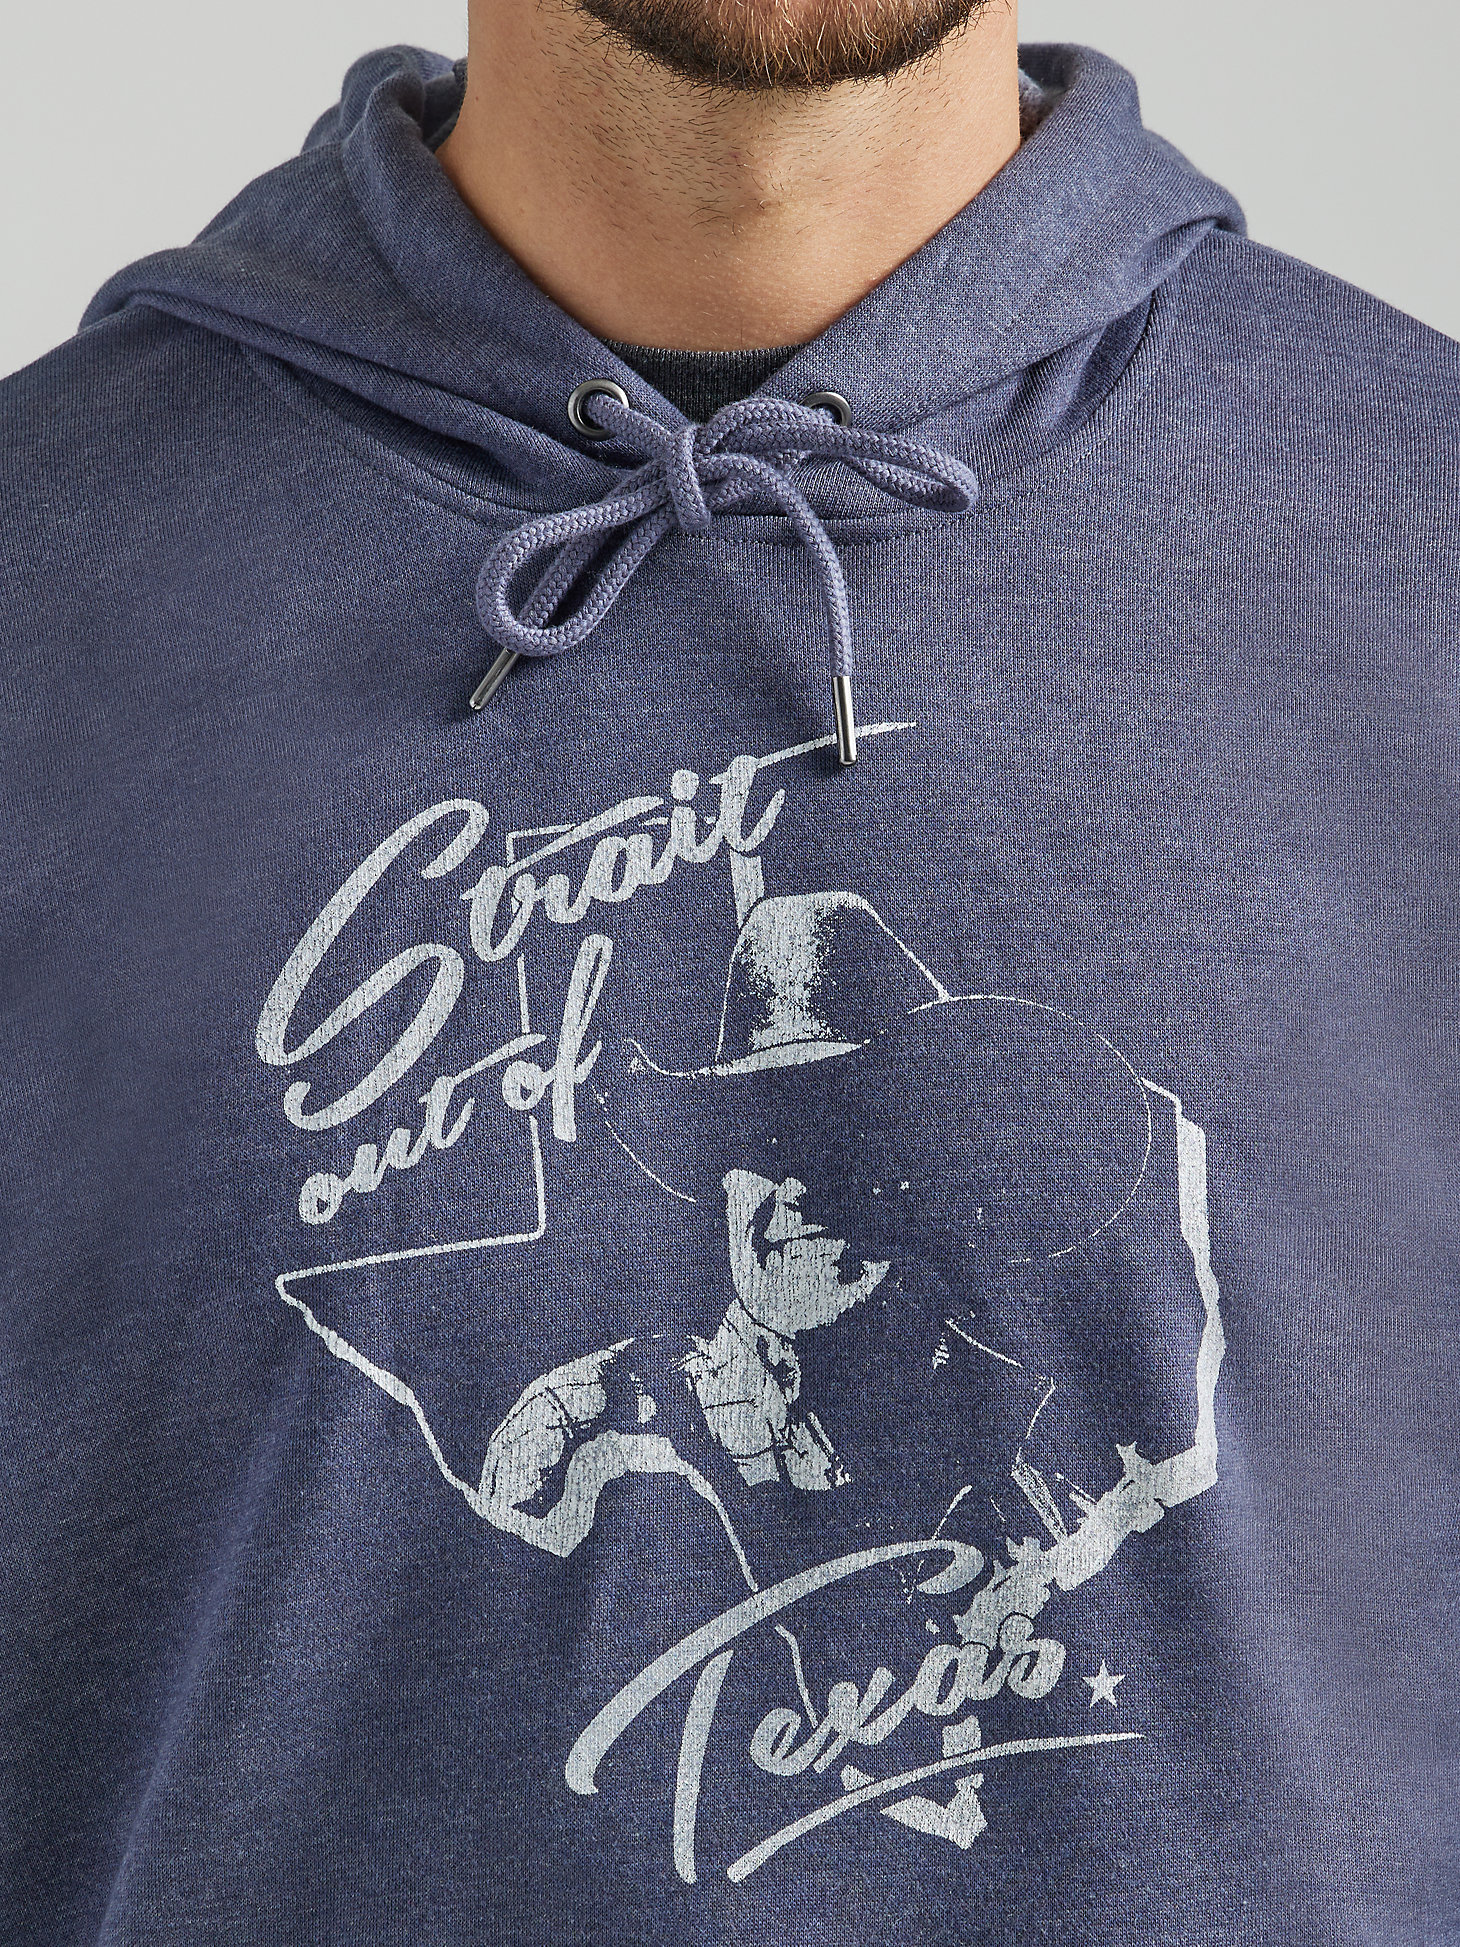 Men's George Strait Out Of Texas Hoodie in Navy Heather alternative view 1